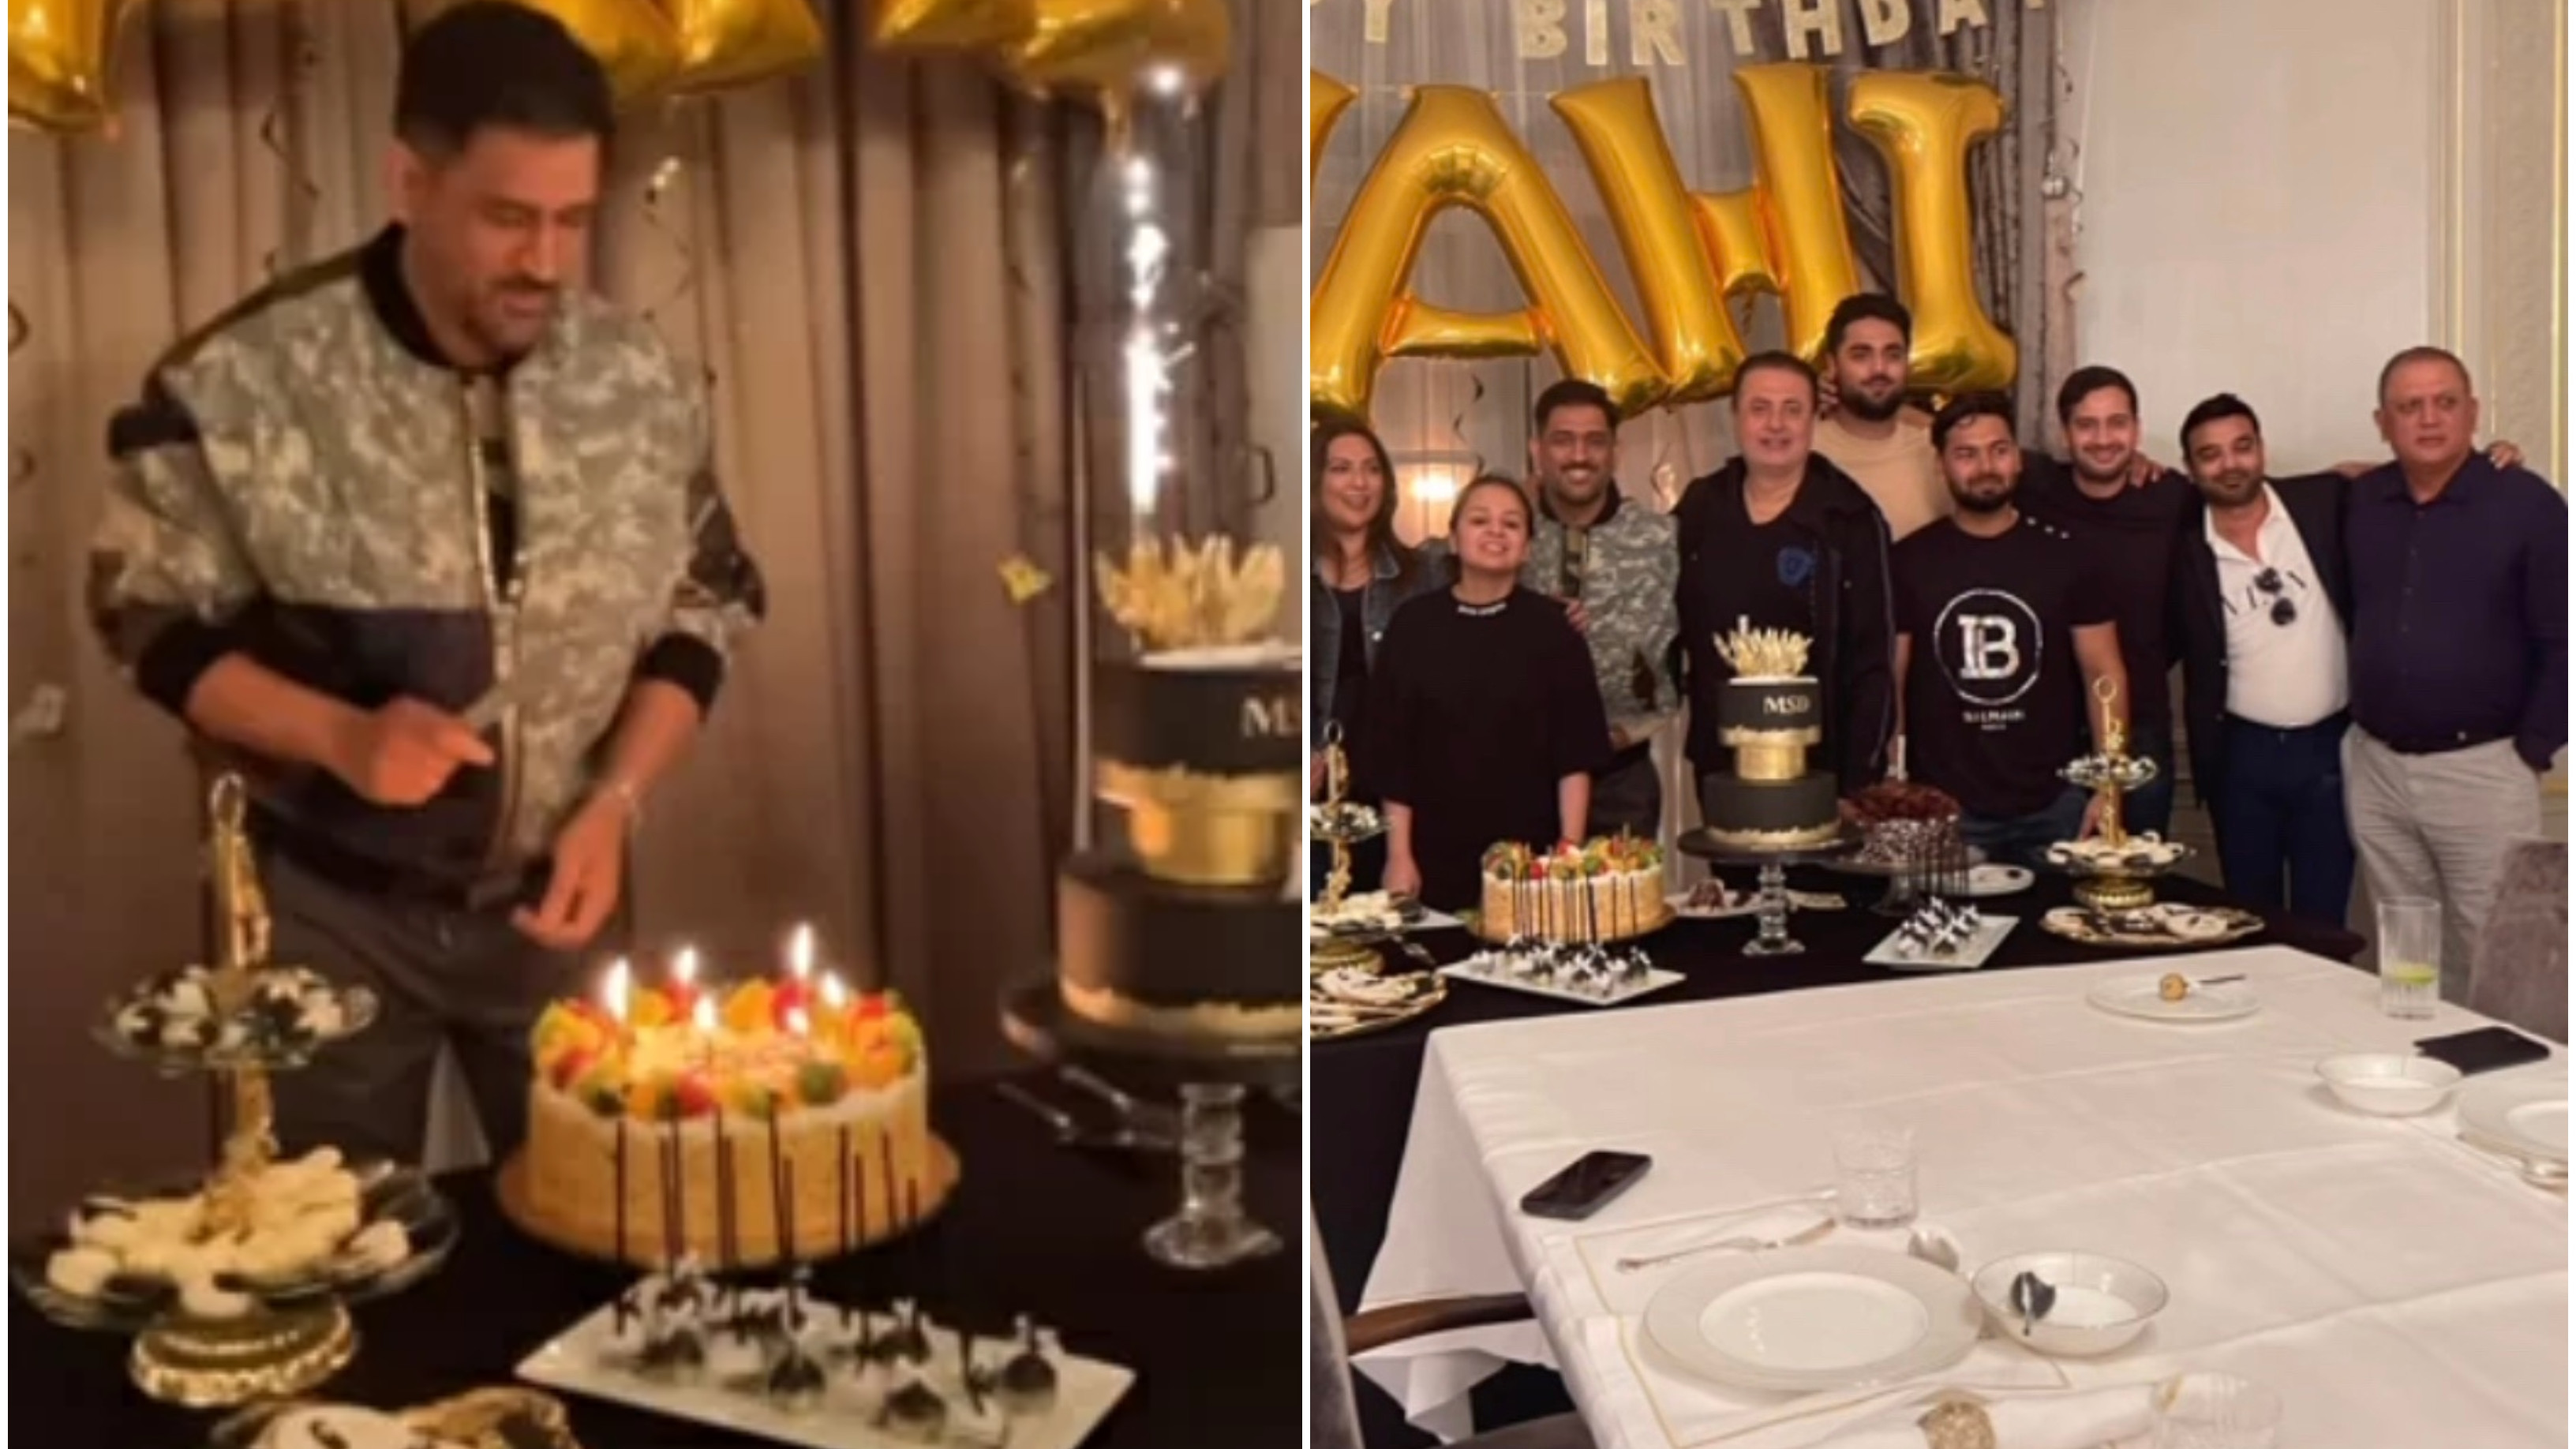 WATCH - MS Dhoni celebrates his 41st birthday in London; Rishabh Pant also joins the celebrations